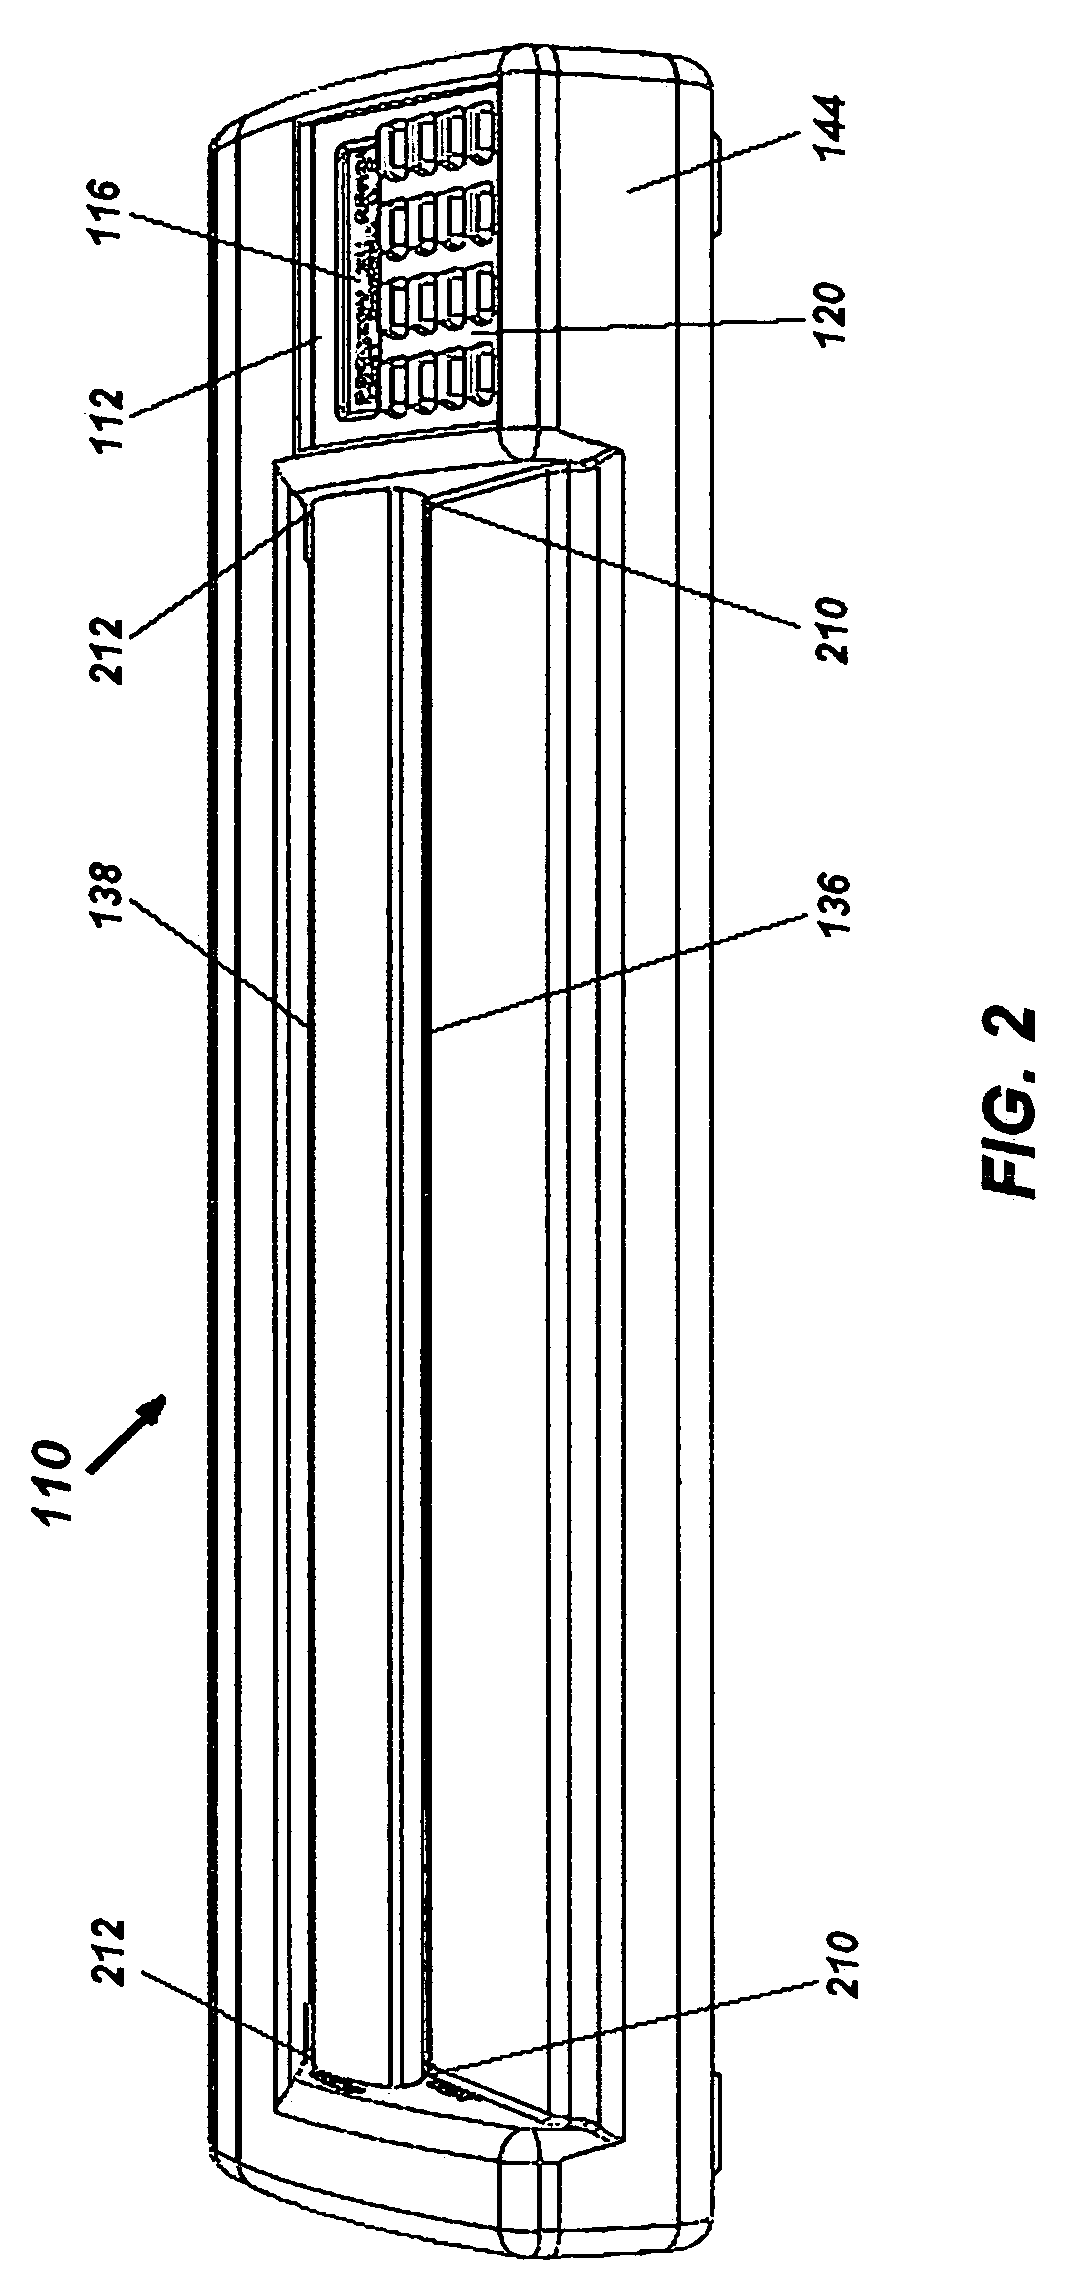 Portable electronic faxing, scanning, copying, and printing device